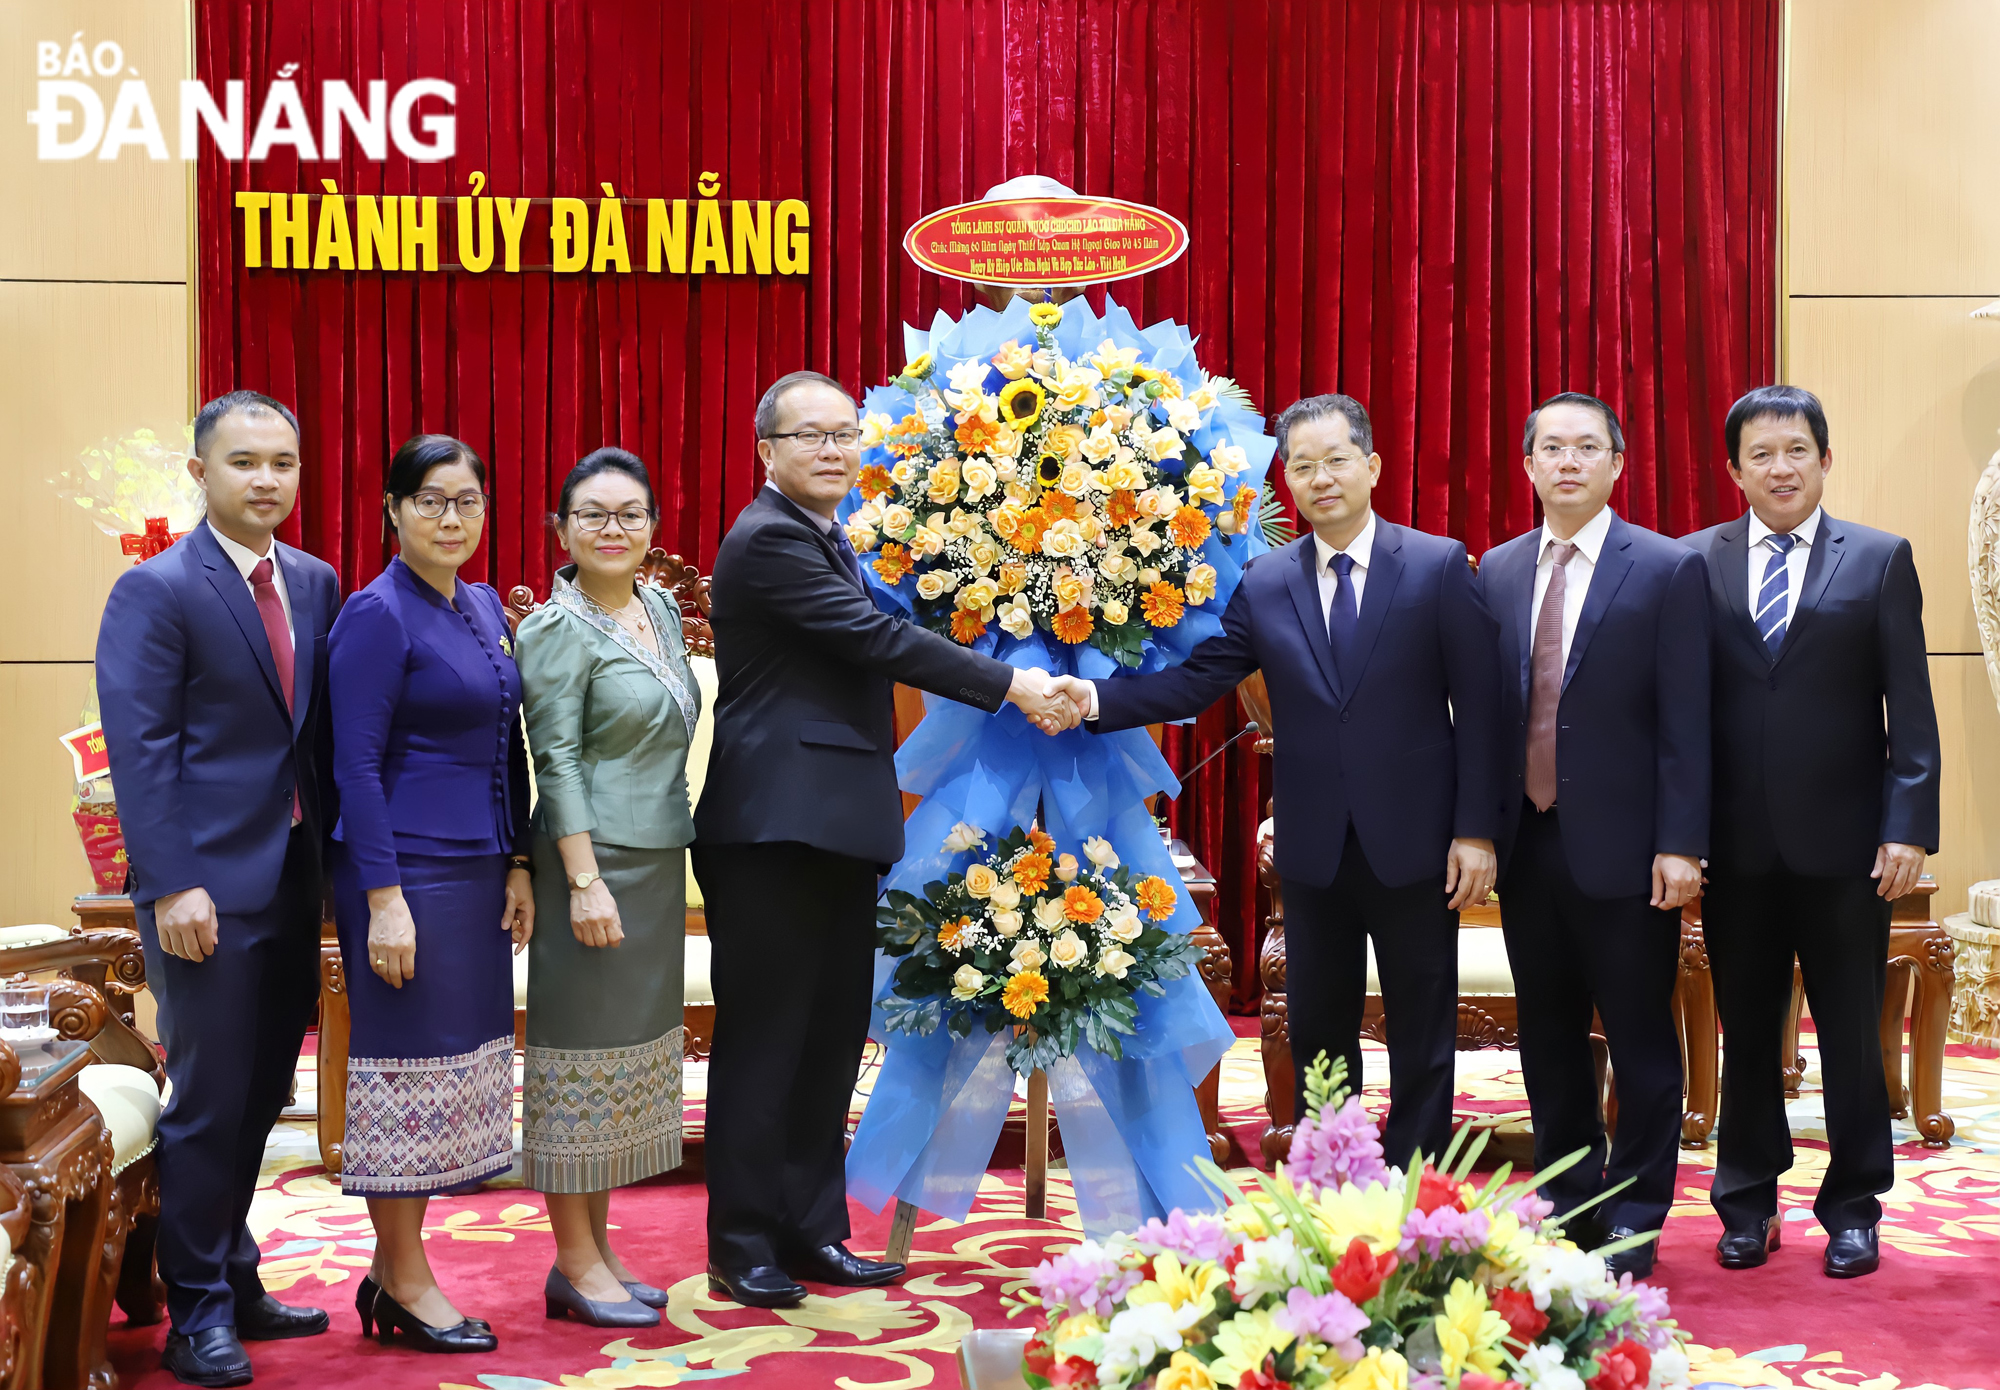 Lao Consul General in Da Nang City Souphanh Hadaoheuang (fourth, left) presenting flowers to the Da Nang leaders